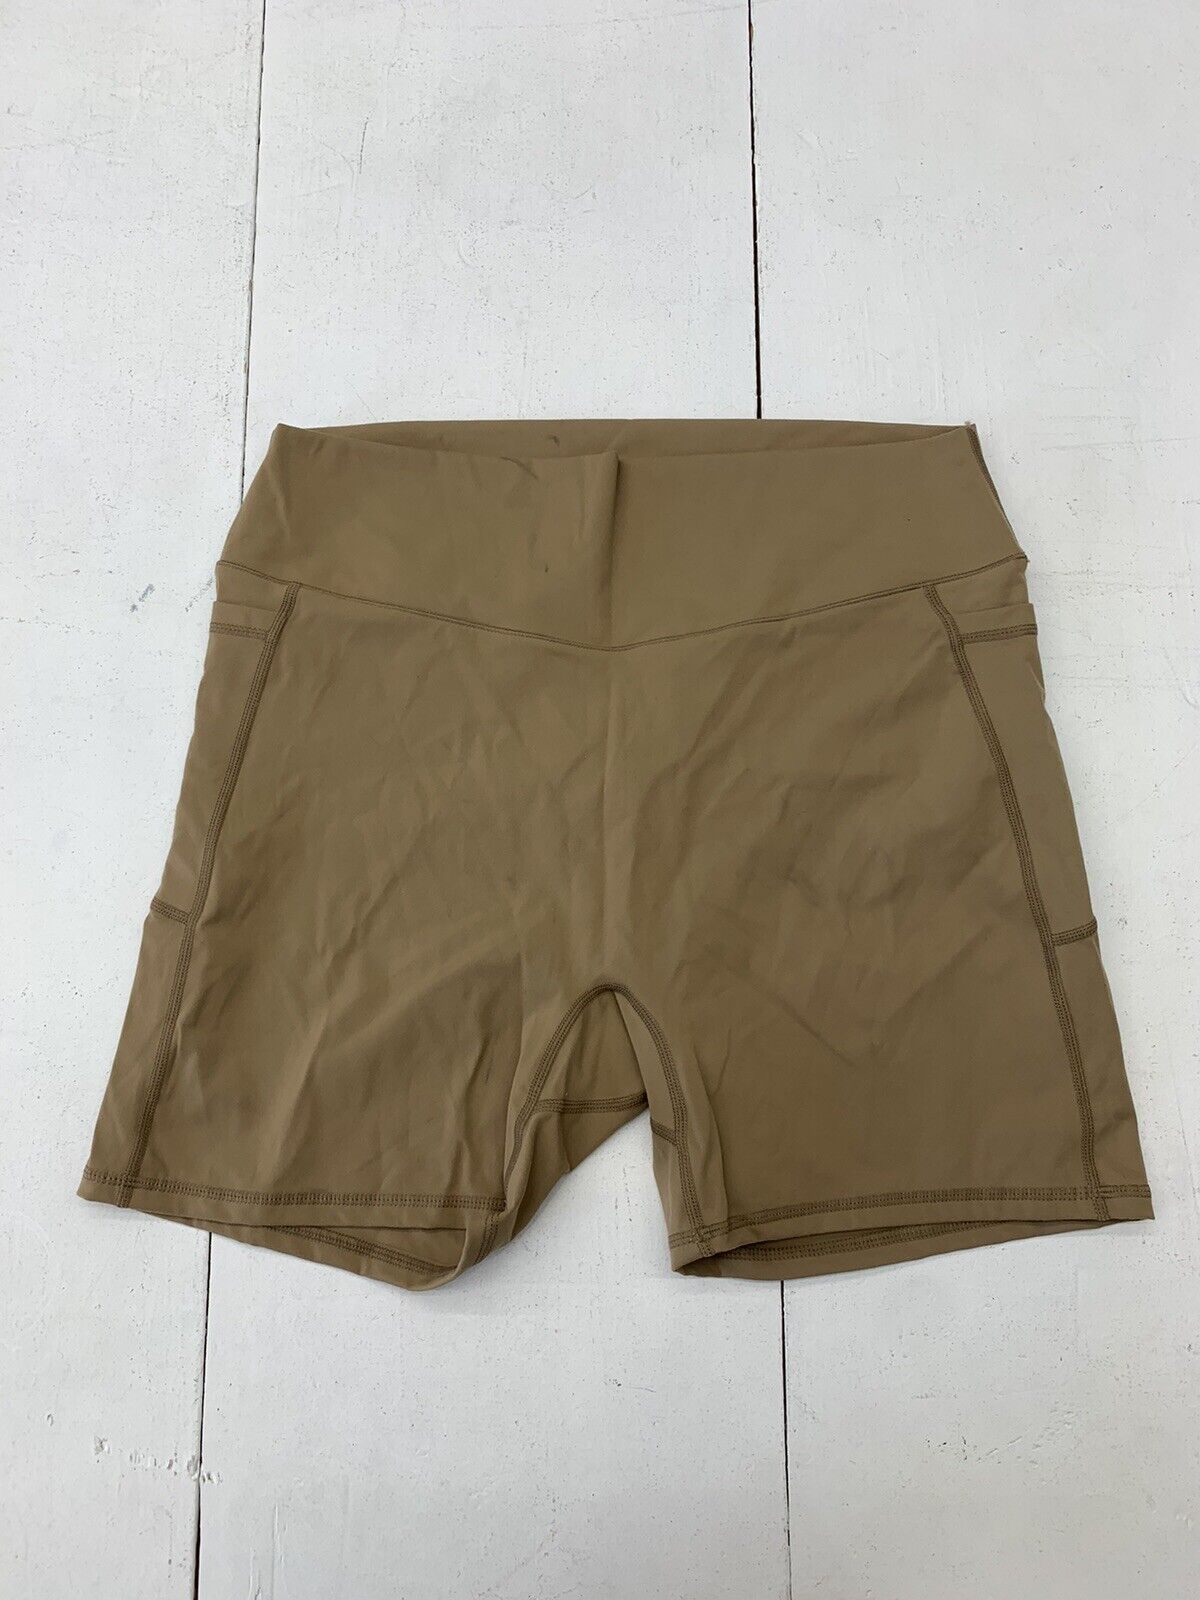 Sunzel Womens Brown Athletic Shorts Size 2XL - beyond exchange